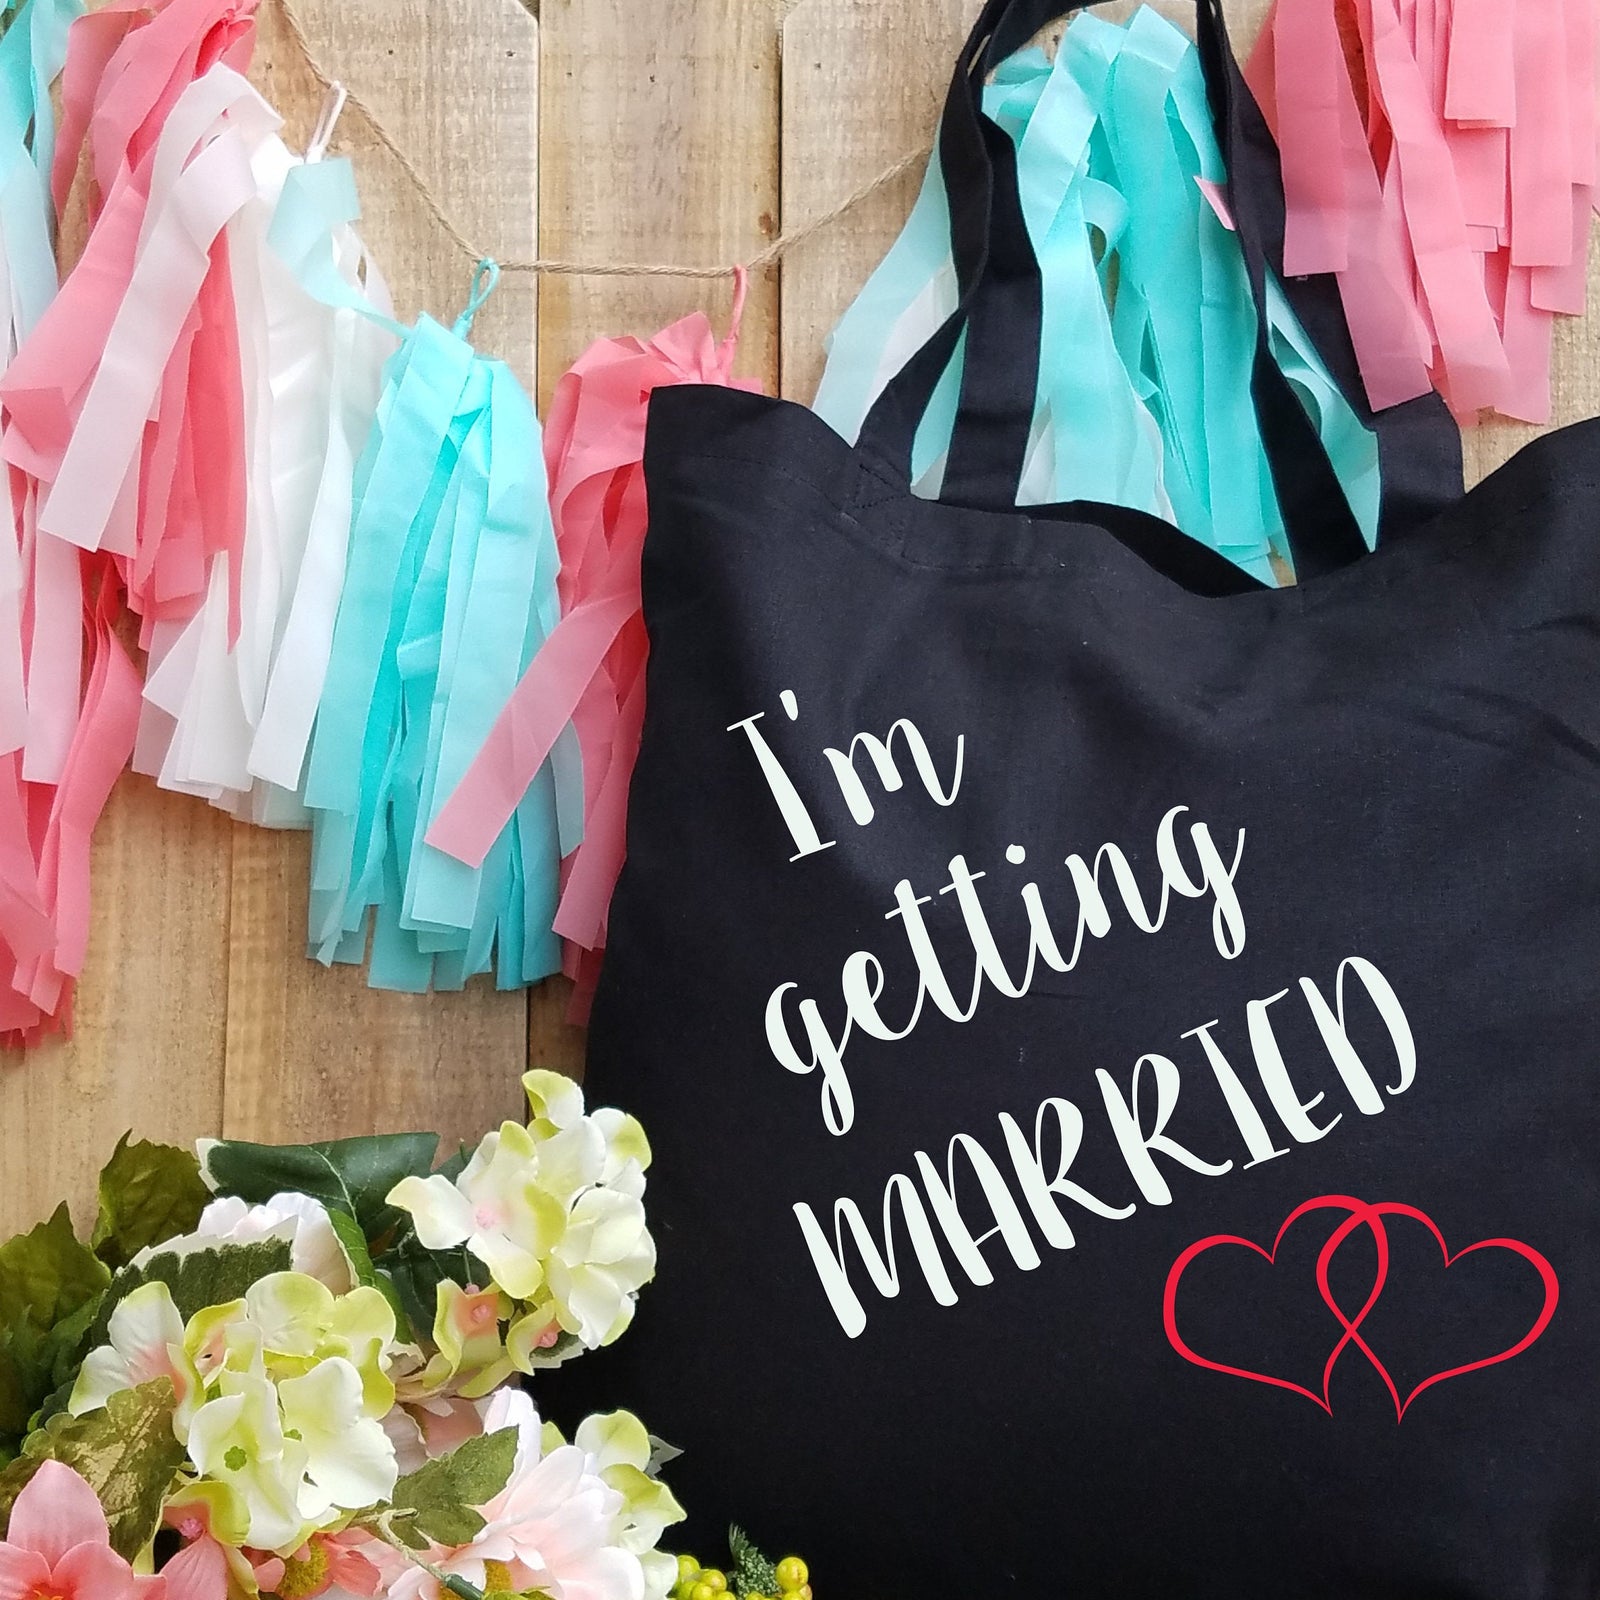 I'm Getting Married Tote Bag - Bride to Be Tote - Bridal Shower Gift - Bride Gift Bag